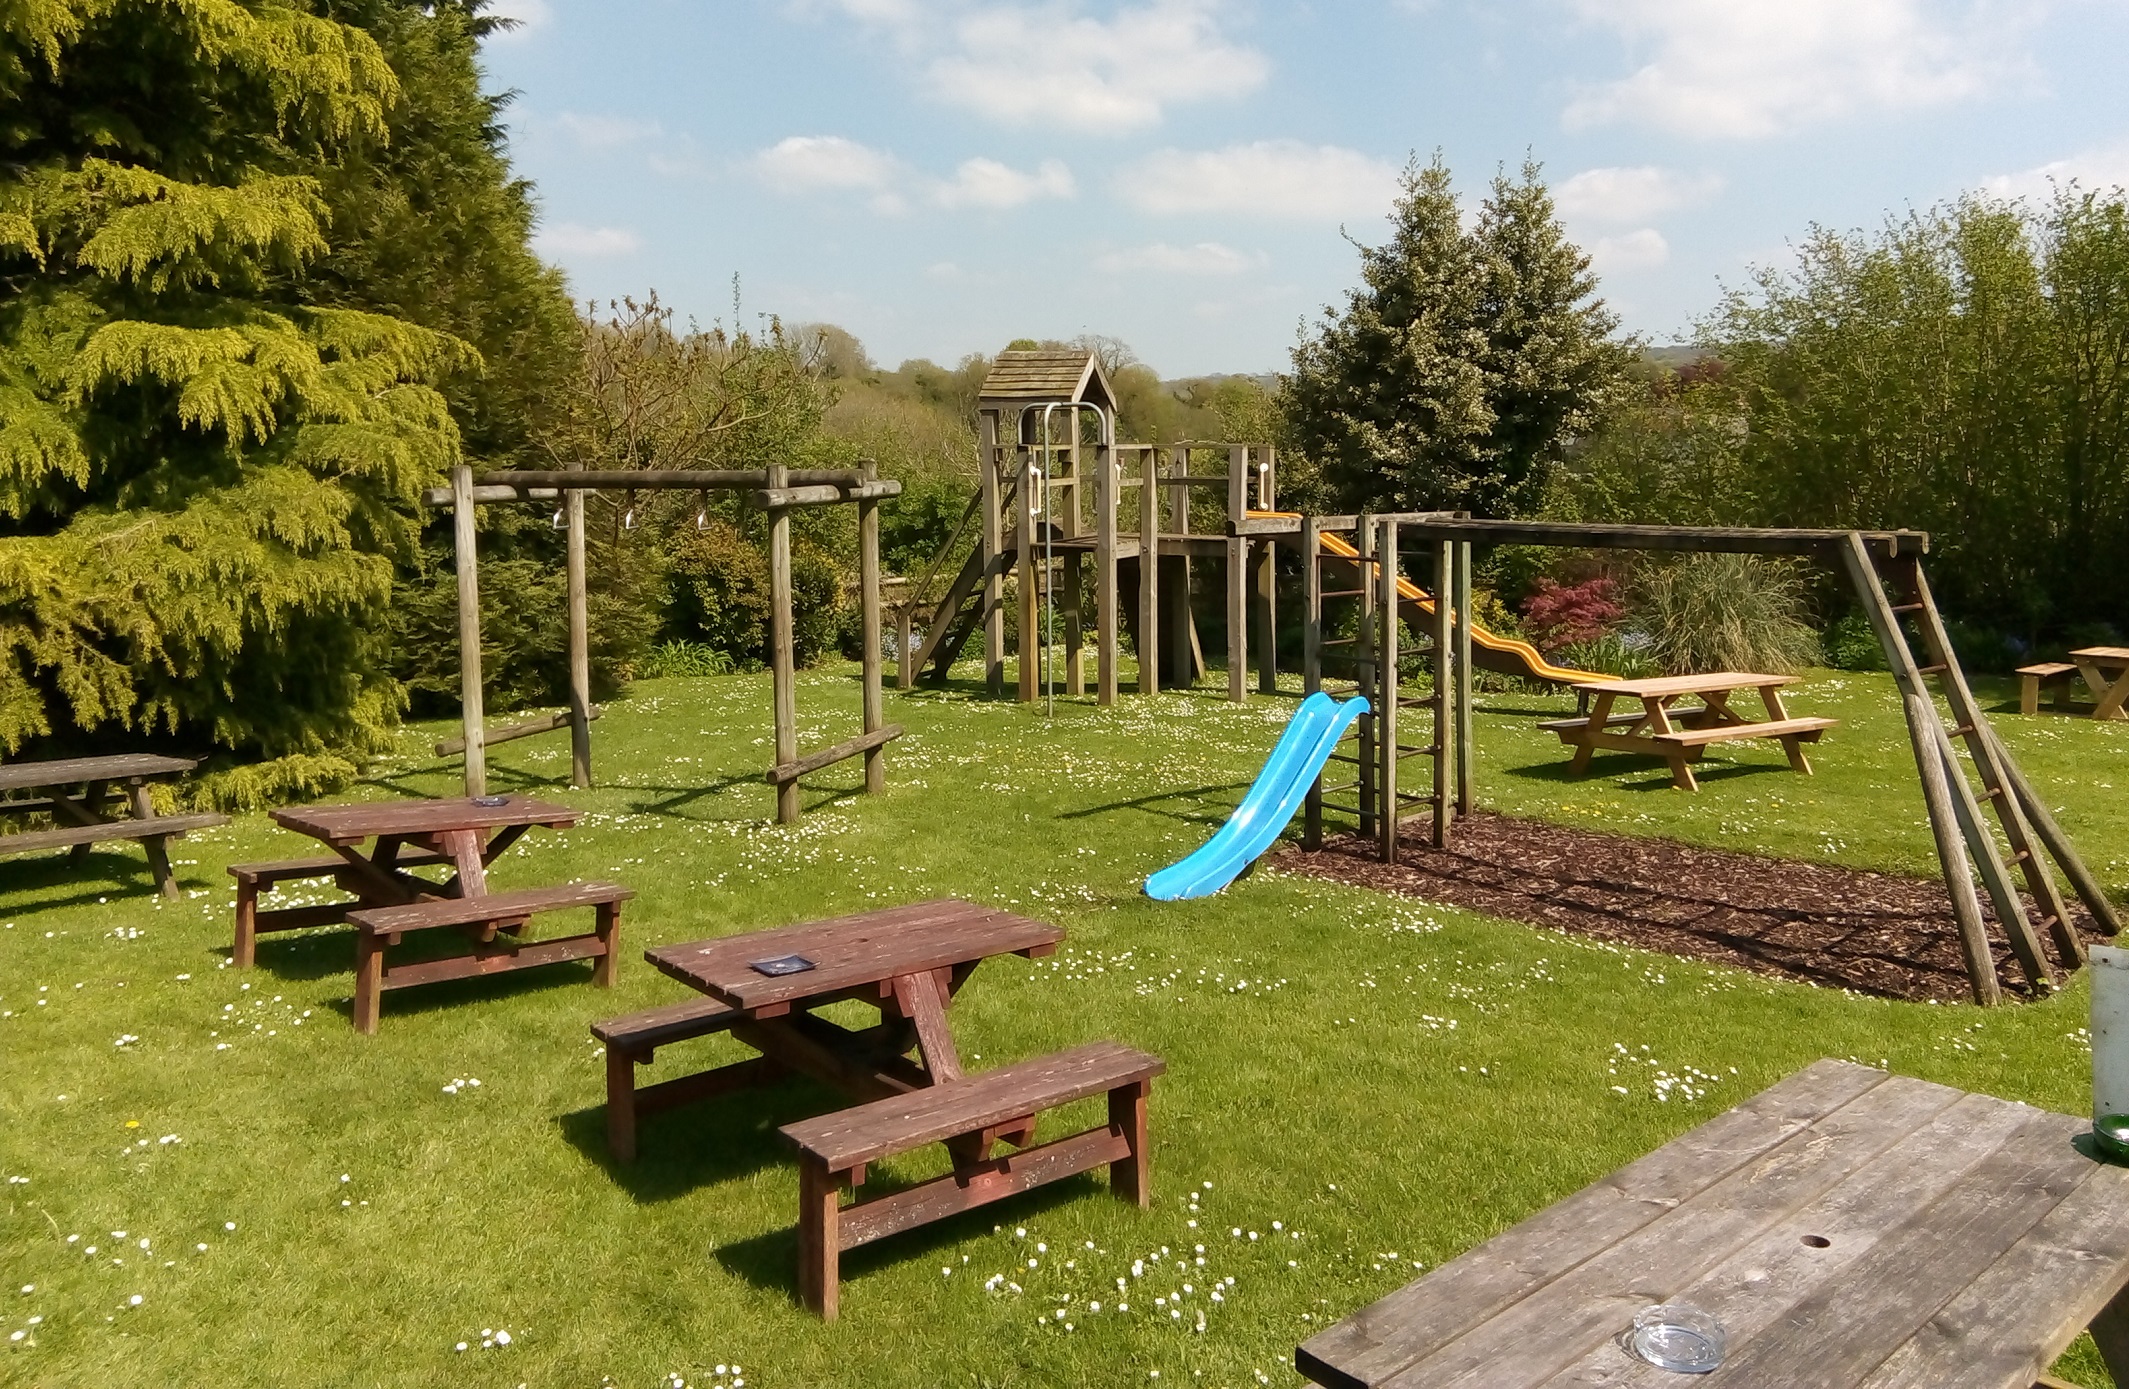 A children's play area in a rural pub garden resplendent with slides and climbing structures, viewed on a sunny day.